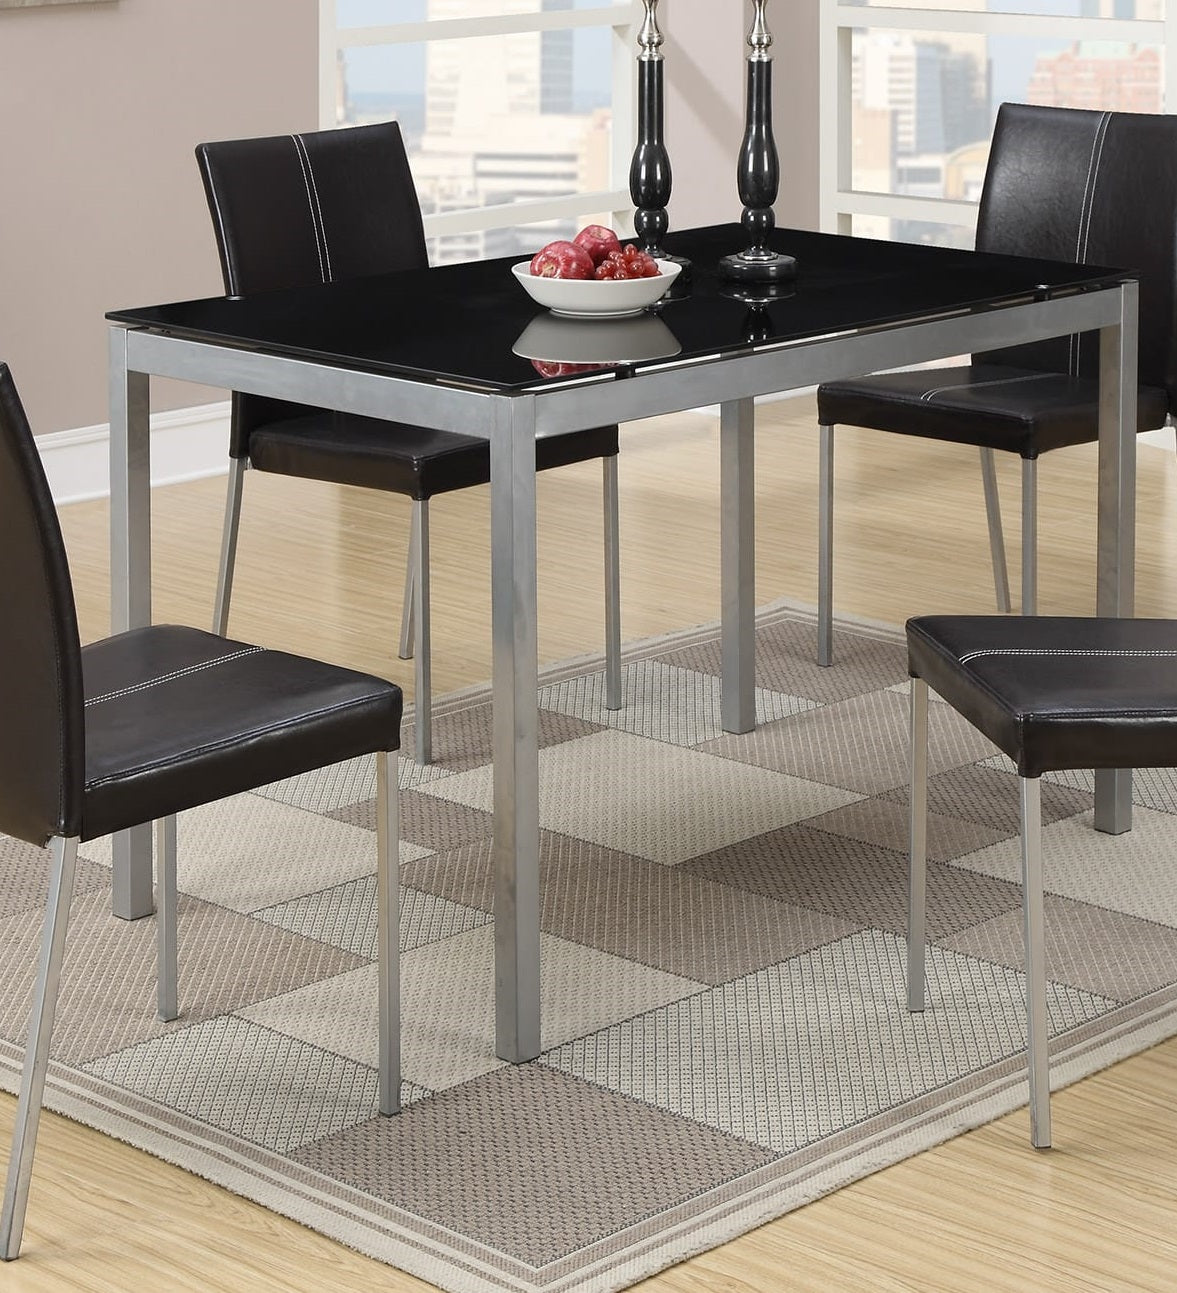 Dinette 5pc Dining Set Table And 4x Chairs Glass Table black-seats 4-metal-dining room-48